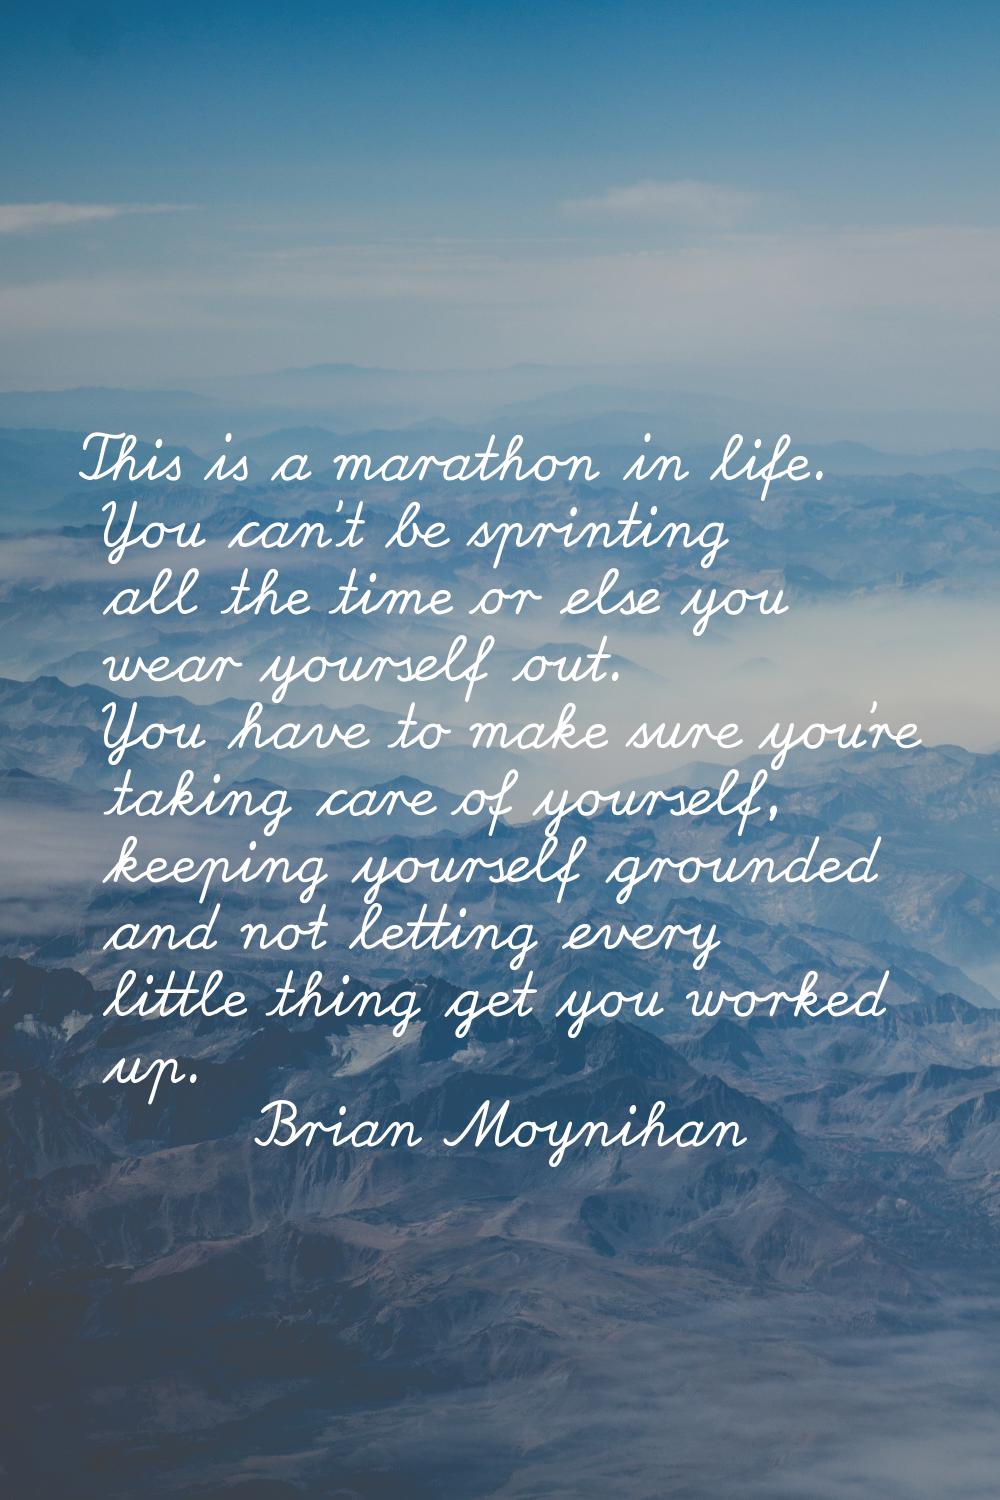 This is a marathon in life. You can't be sprinting all the time or else you wear yourself out. You 